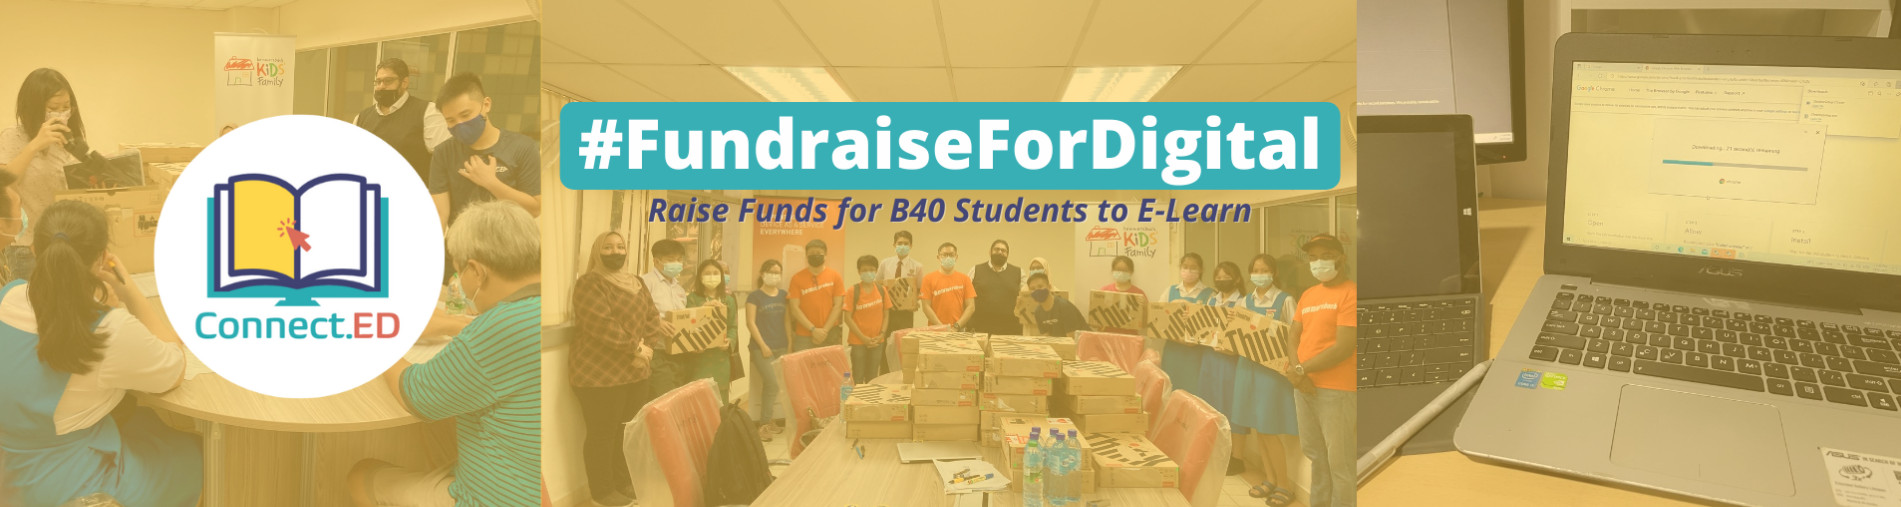 #FundraiseForDigital: Raise Funds for B40 Students to E-Learn